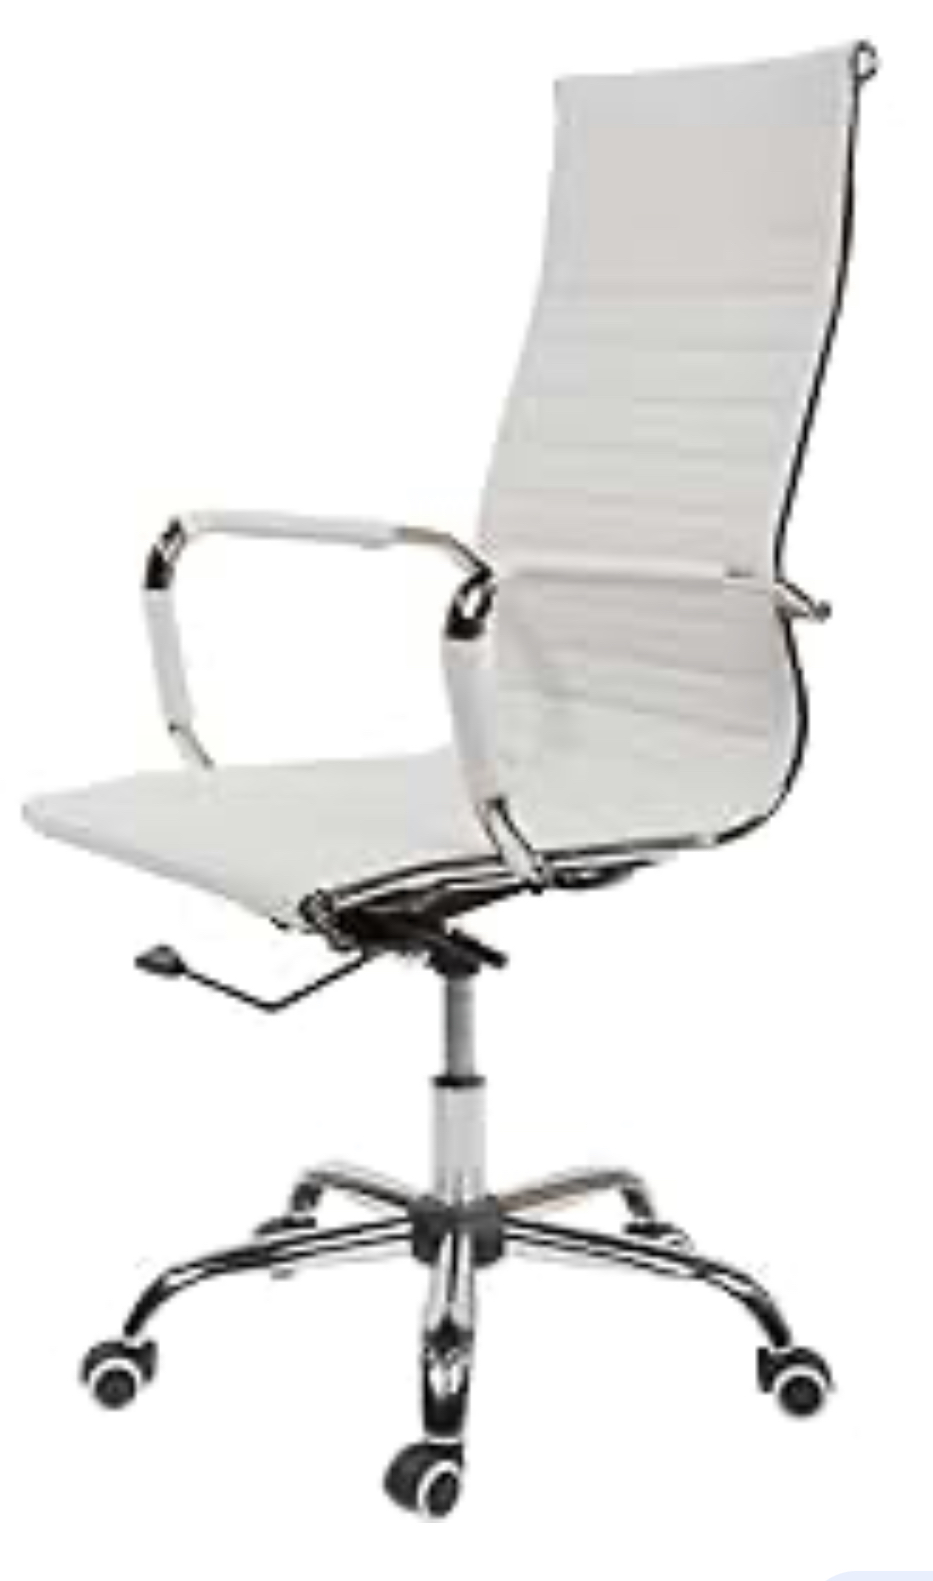 Home Office Designer Epsom  ribbed office chair White High Back Gokd arms and base 